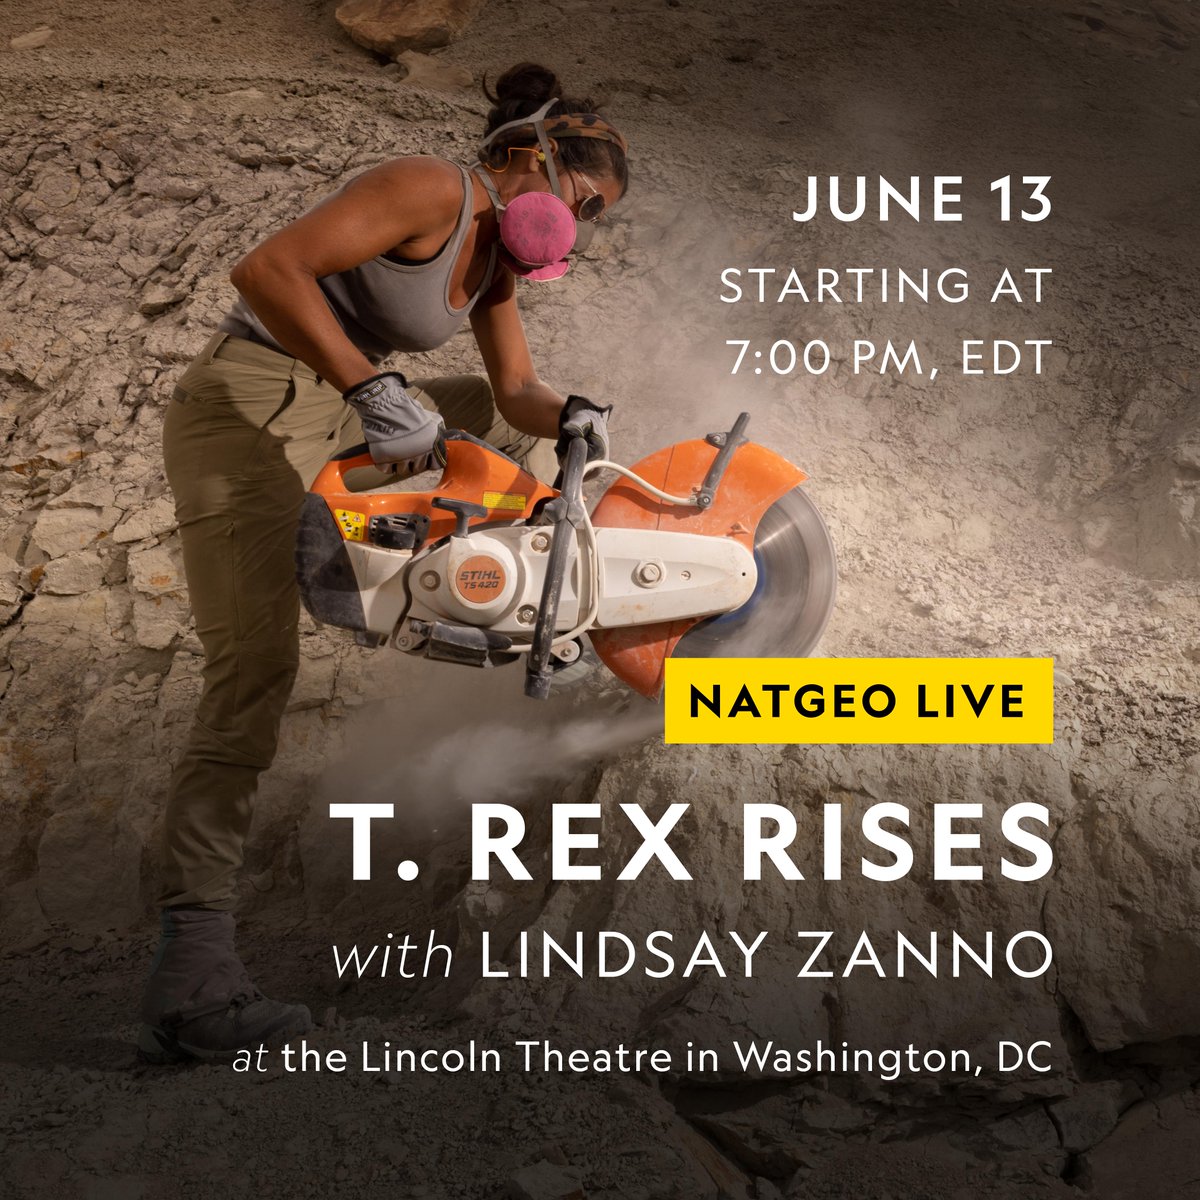 Lindsay Zanno 🦖 T. rex Rises | June 13 at the Lincoln Theater Get your tickets now! ➡ on.natgeo.com/45c5XzG